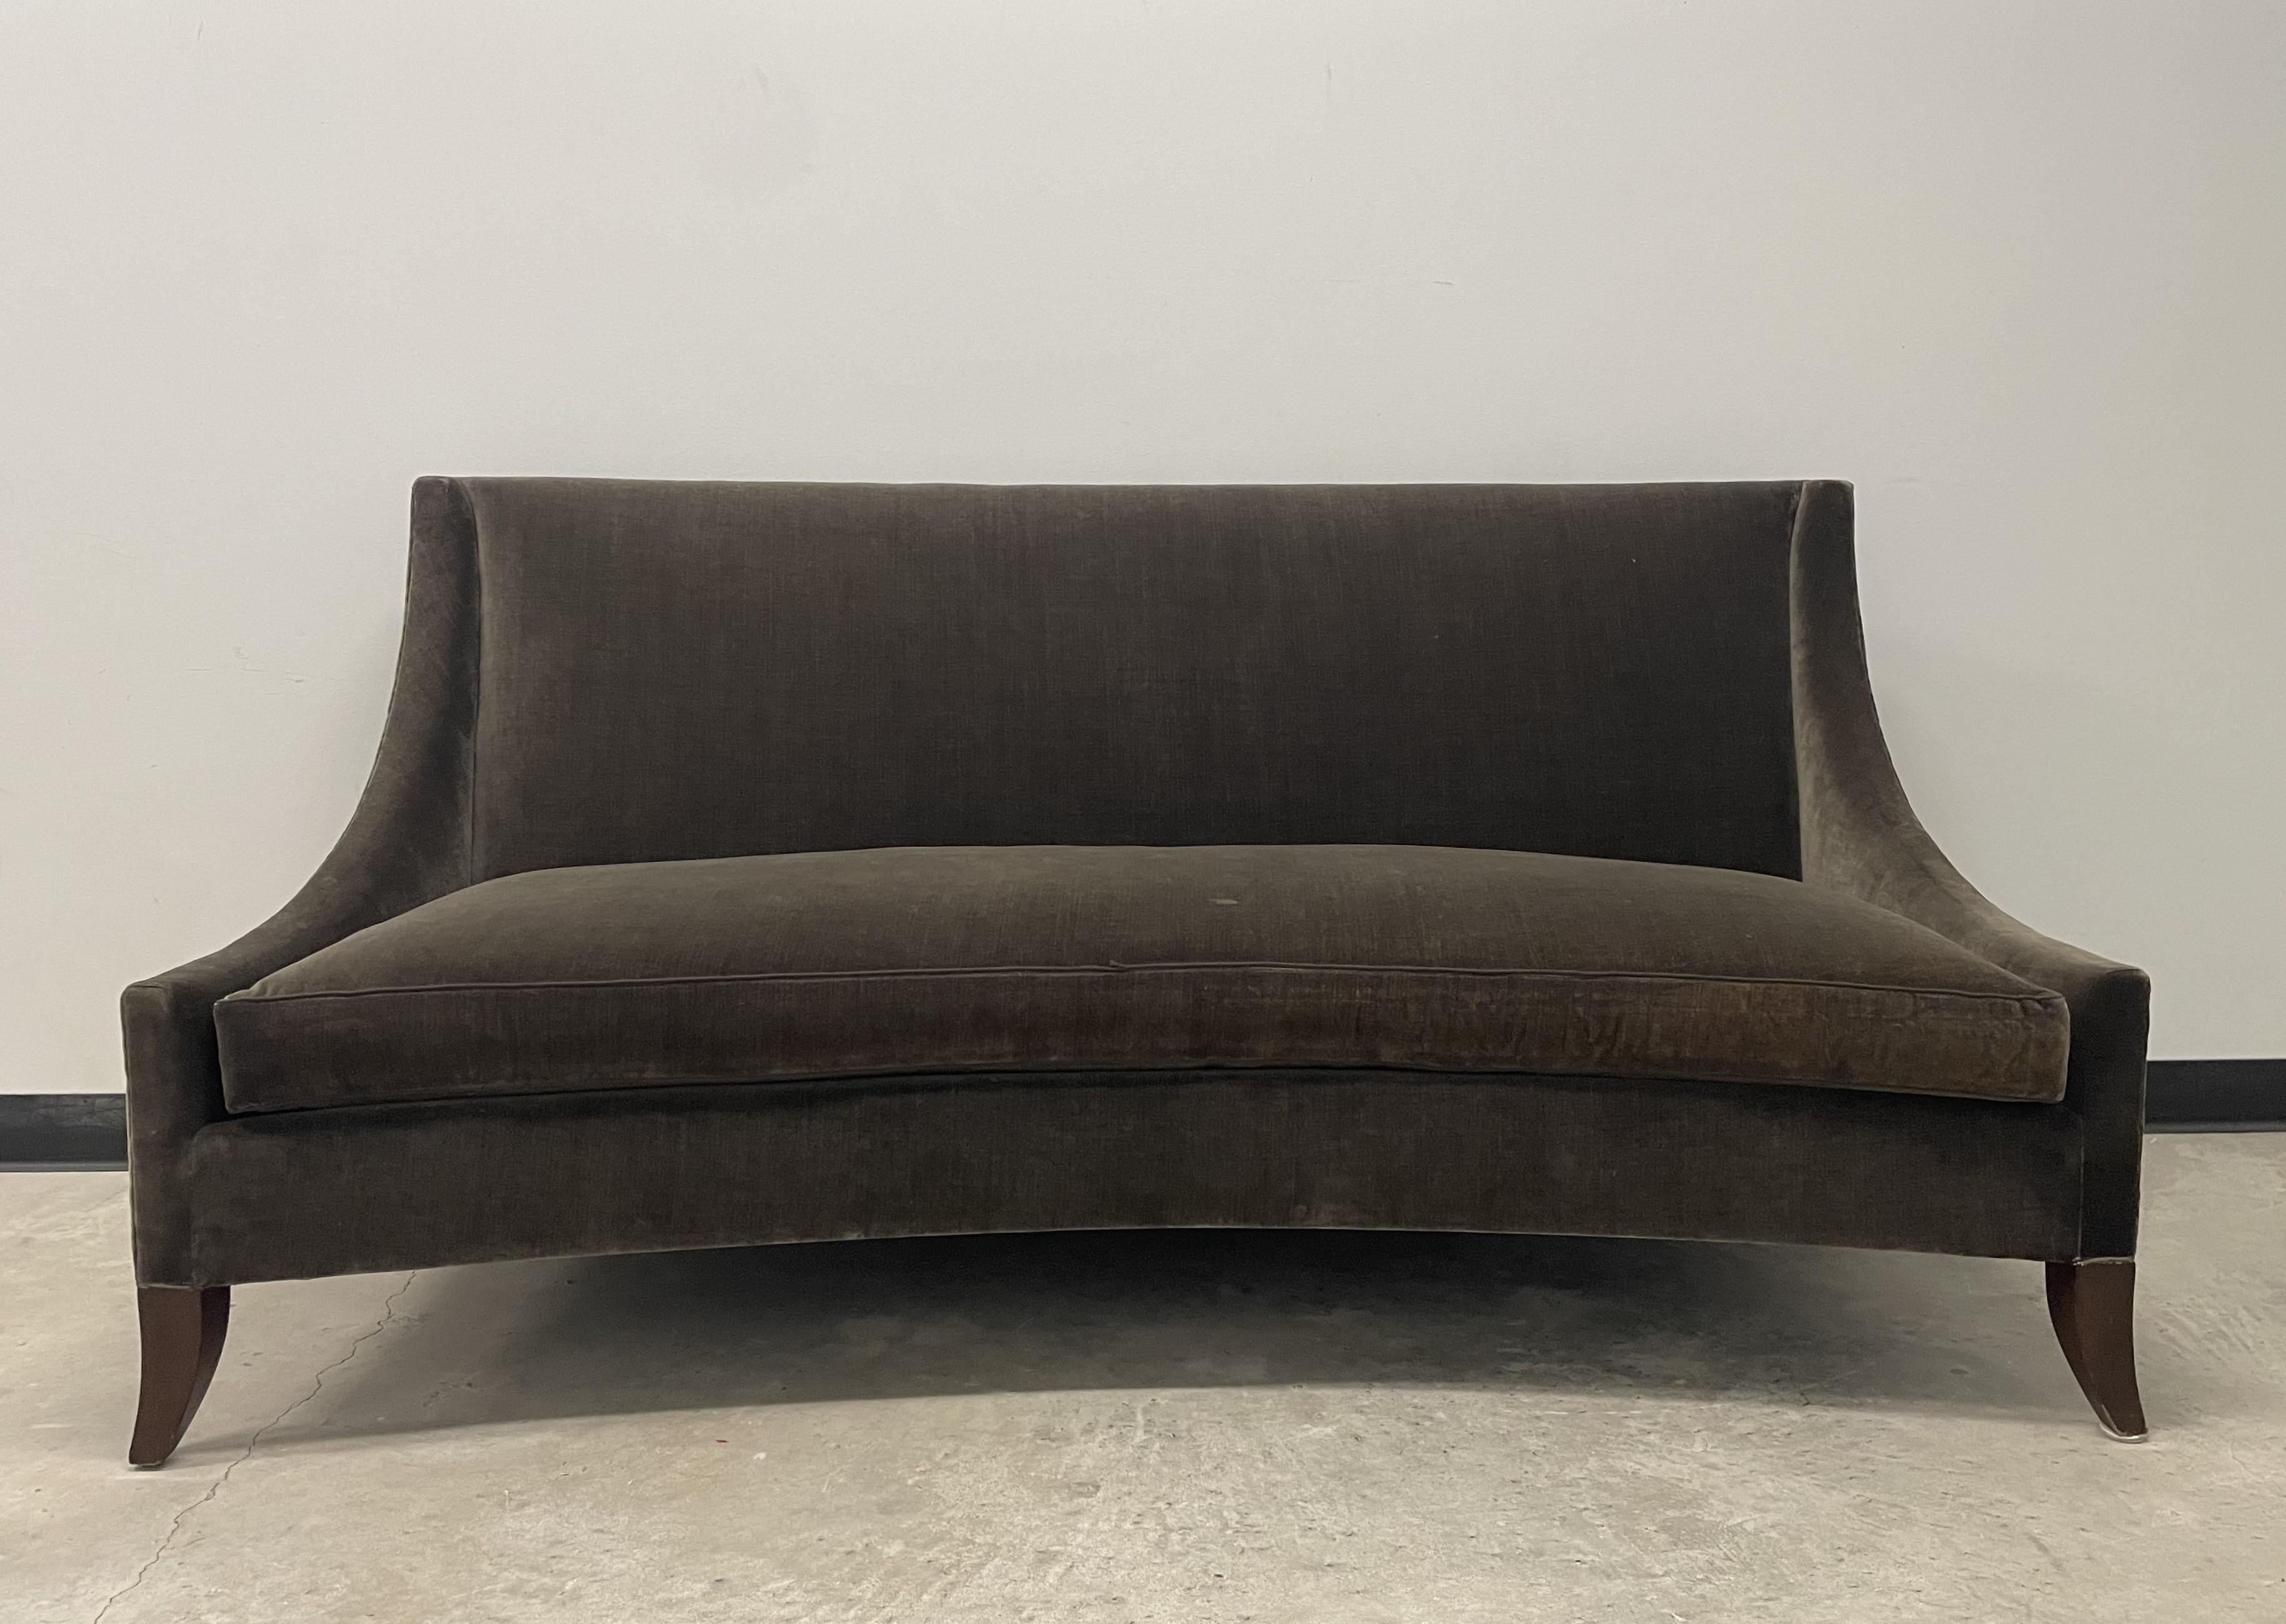 The graceful and simple MCM lines, quality craftsmanship and upholstery captured my attention with this Gerard sofa from the Dessin Fournir Collections. In particular, the richly saturated grey-brown-olive tones of the velvet upholstery (that